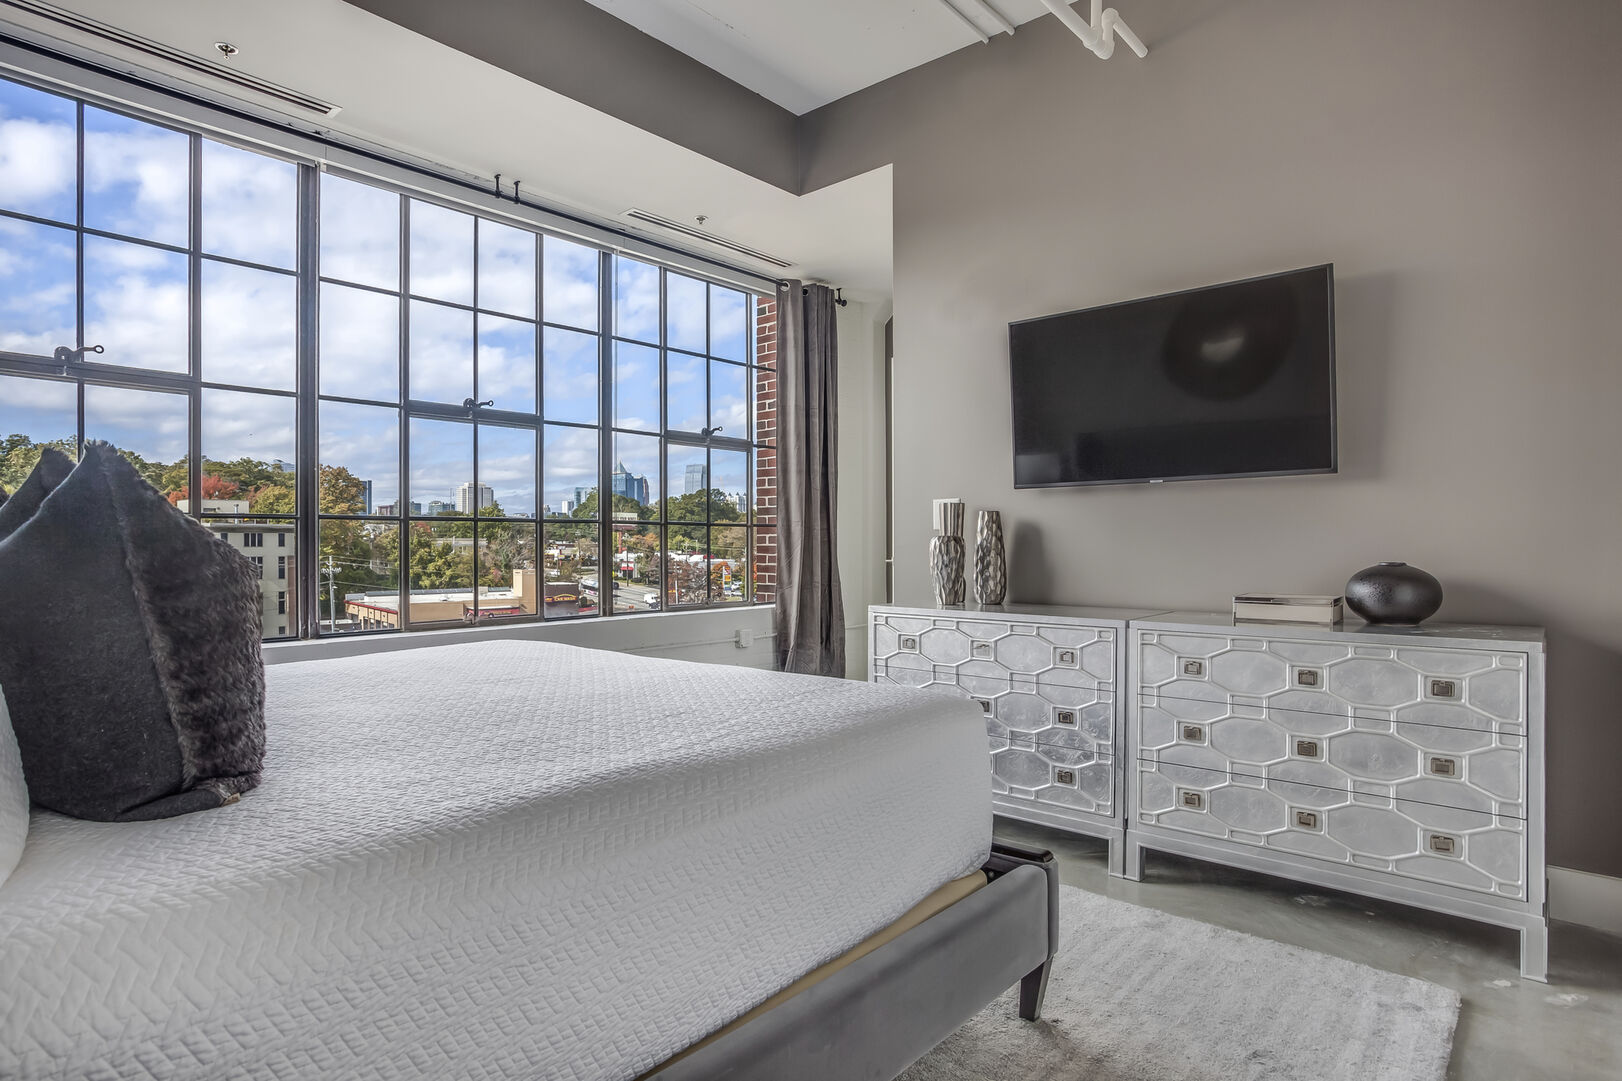 Master Bedroom in Lush Loft Has an Expansive View